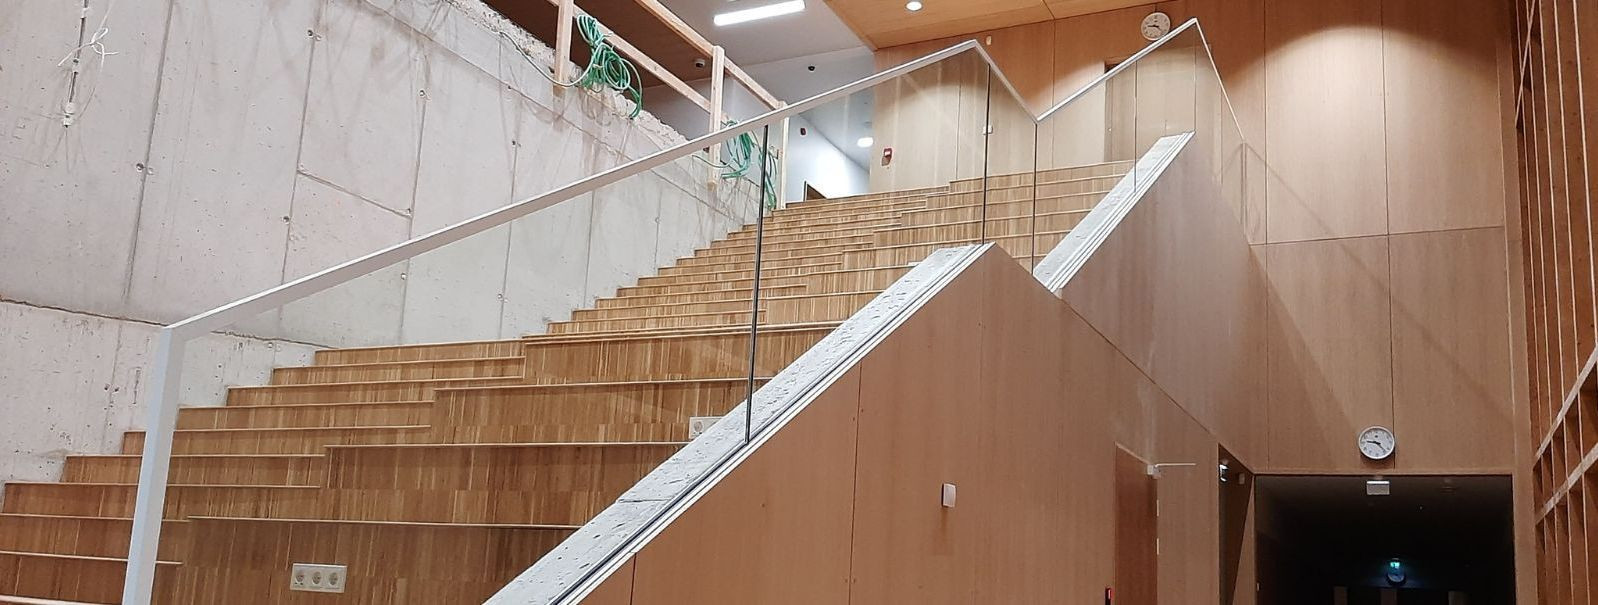 Glass railings offer a sleek, modern aesthetic that can enhance any architectural design. They provide unobstructed views while ensuring safety and compliance w